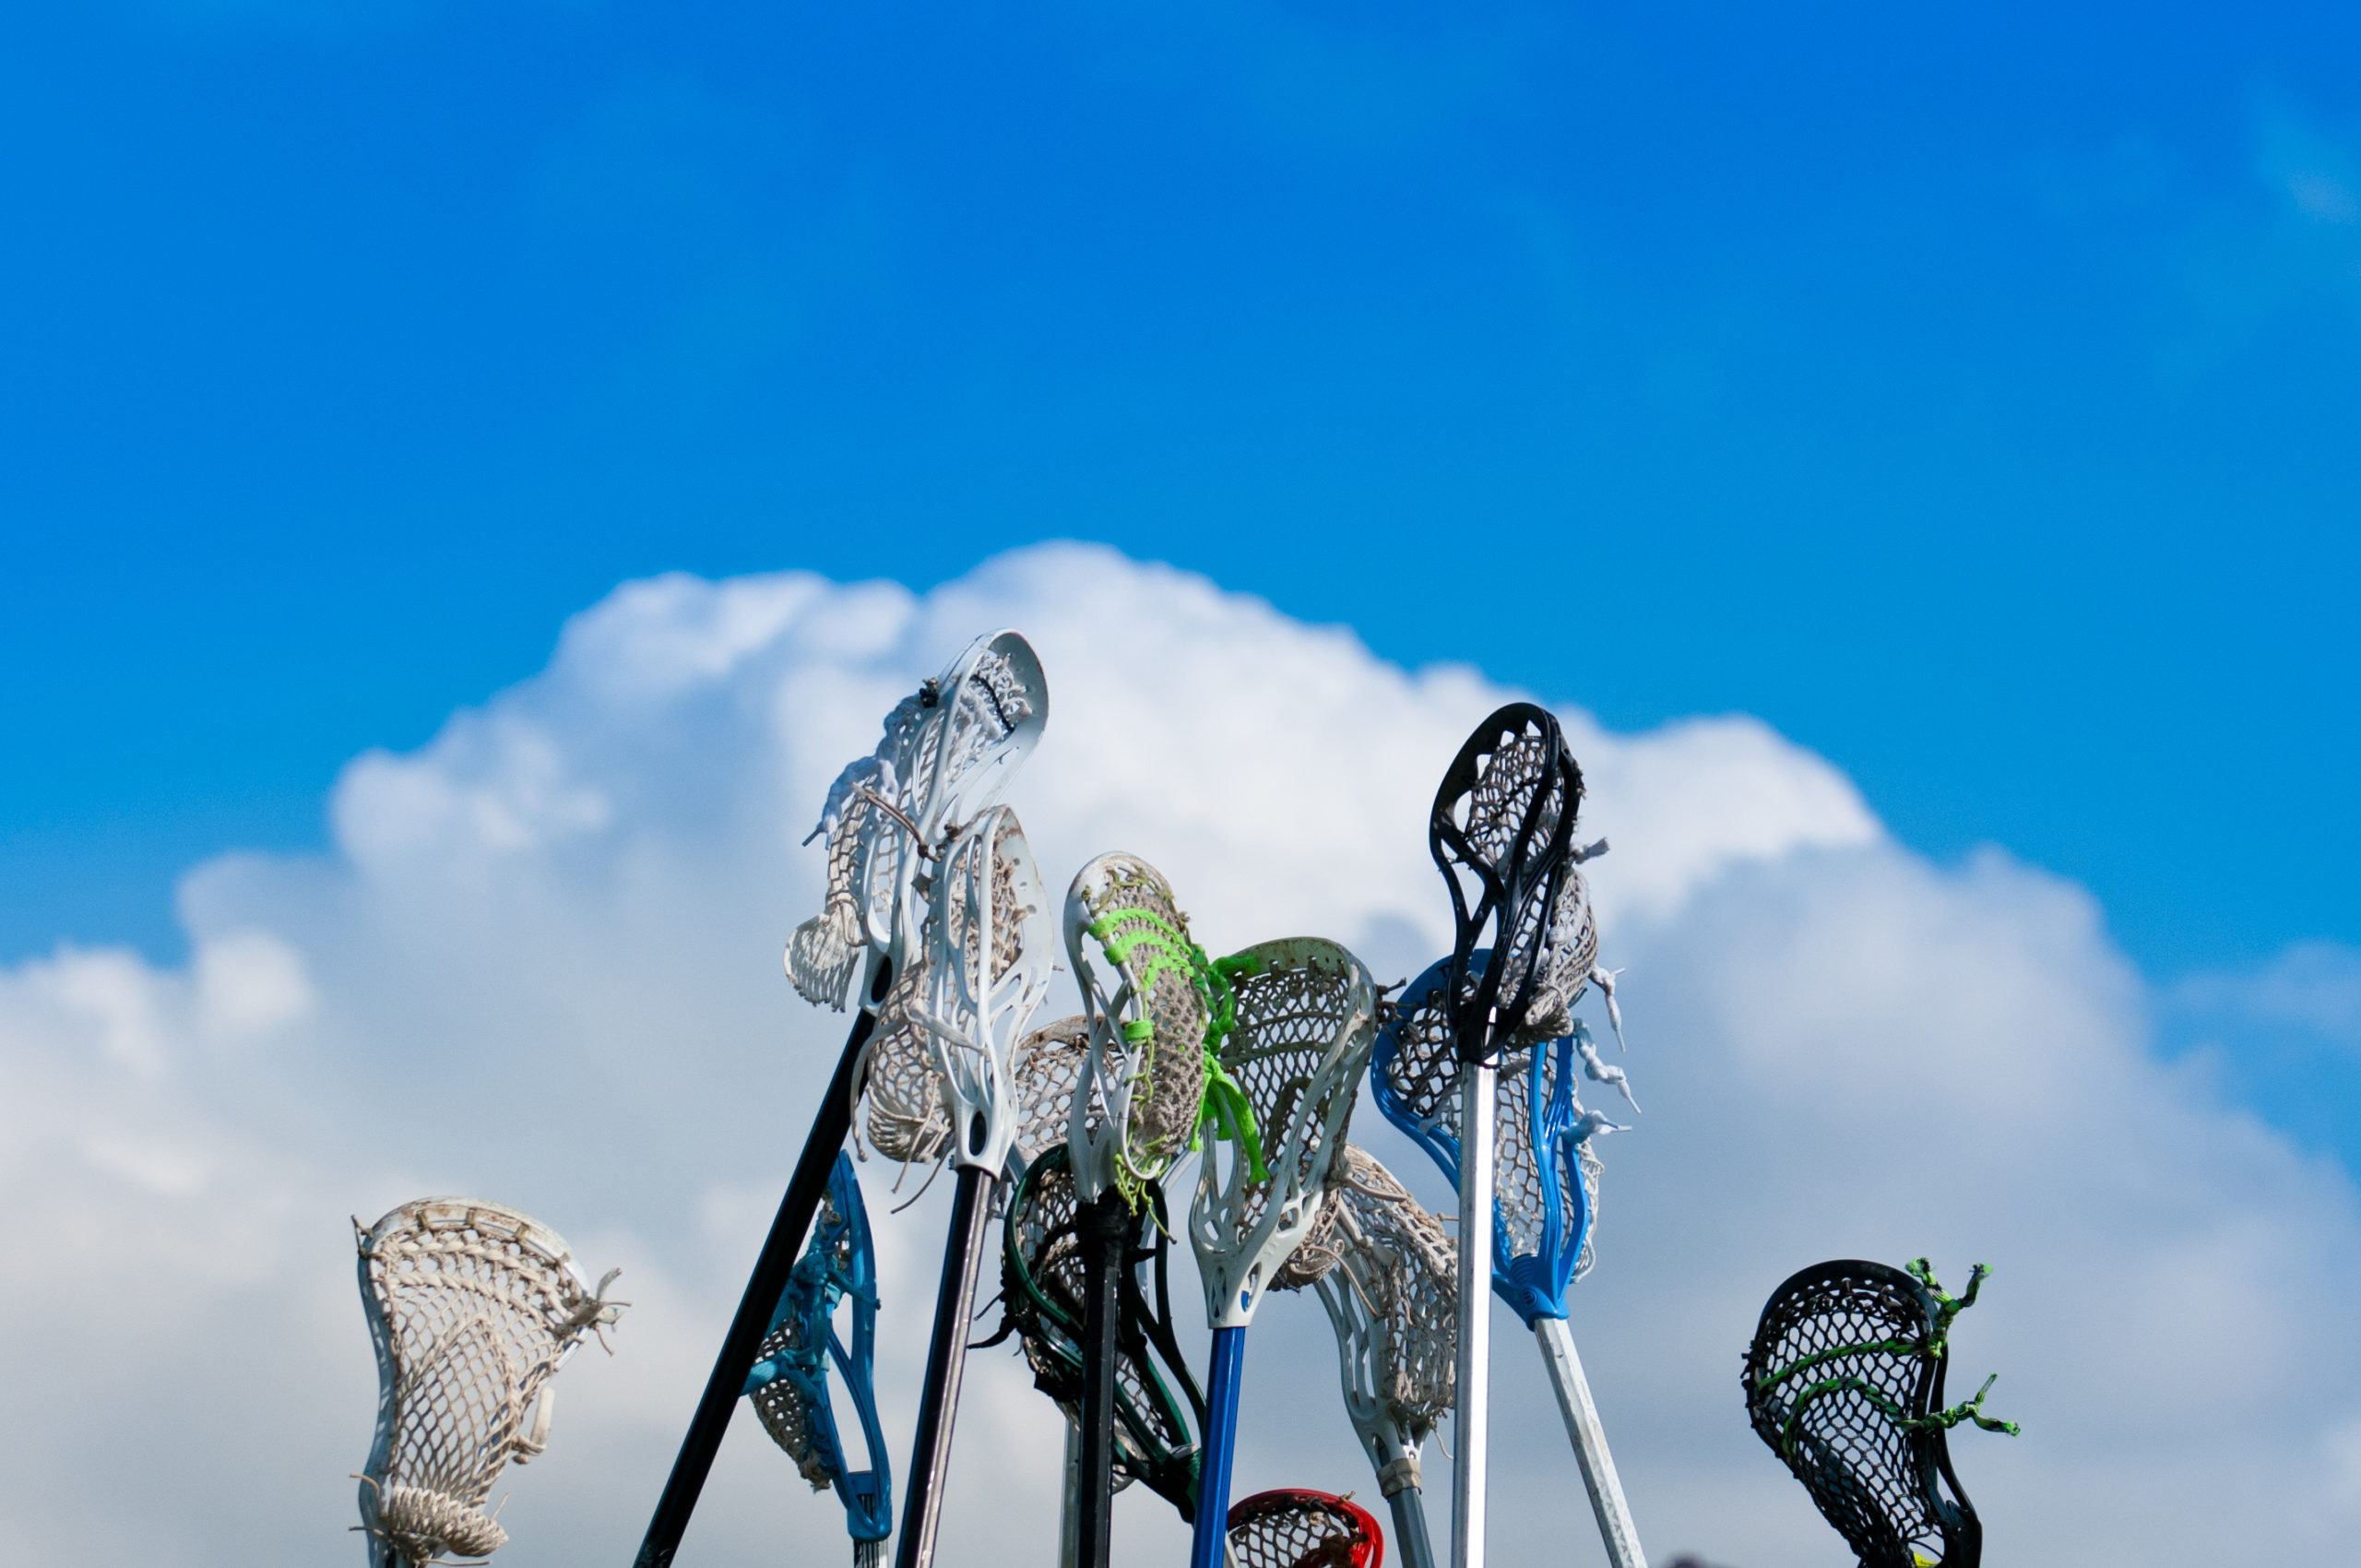 Many lacrosse sticks and heads held high in sky